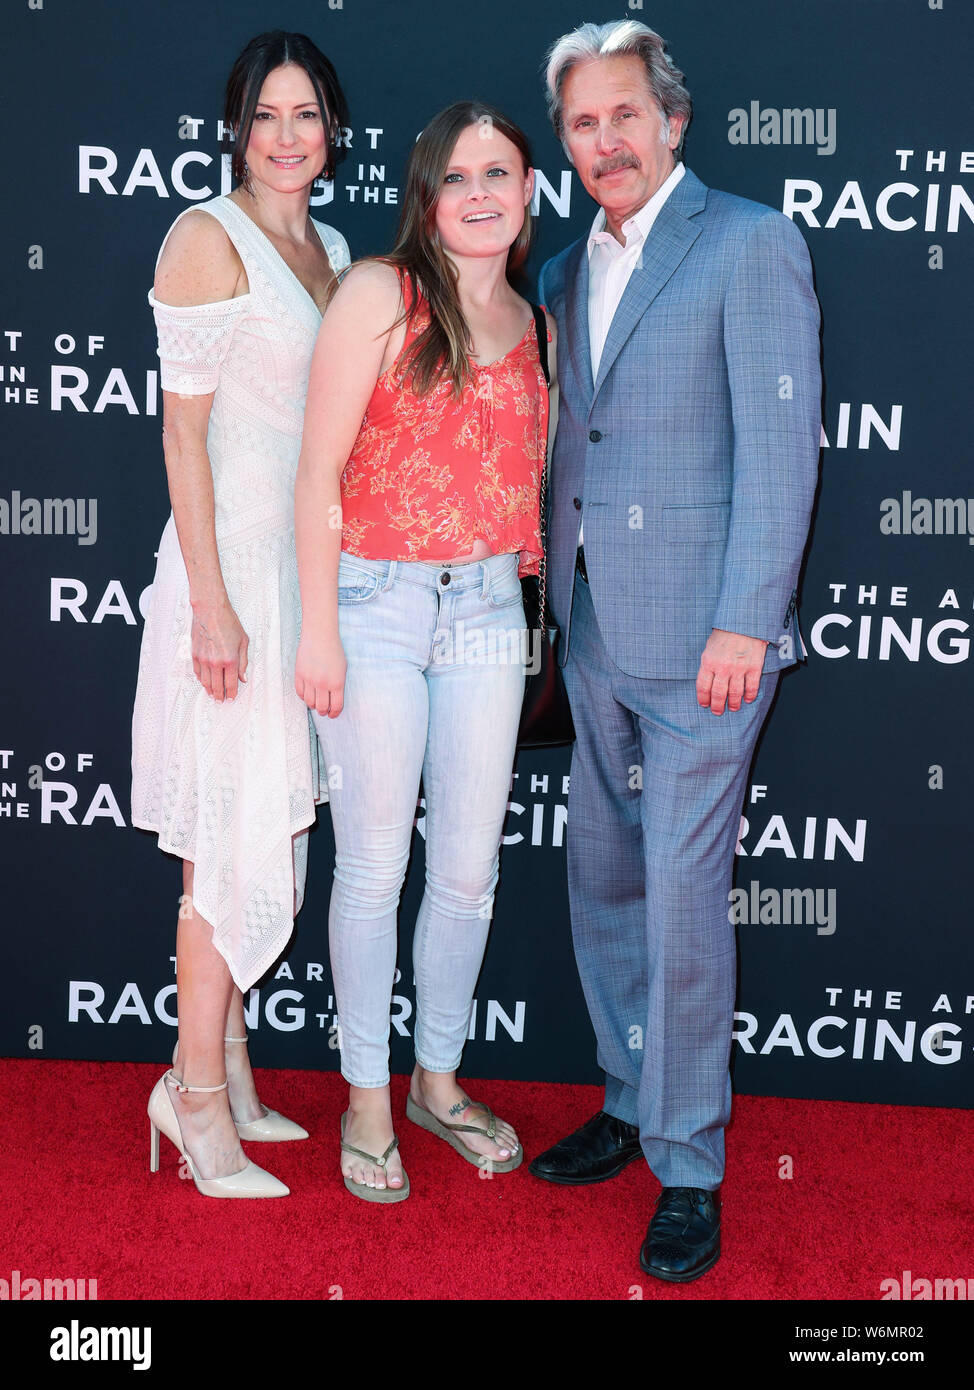 Hollywood, United States. 01st Aug, 2019. HOLLYWOOD, LOS ANGELES, CALIFORNIA, USA - AUGUST 01: Gary Cole and Mary Cole arrive at the Los Angeles Premiere Of 20th Century Fox's 'The Art Of Racing In The Rain' held at the El Capitan Theatre on August 1, 2019 in Hollywood, Los Angeles, California, United States. (Photo by Xavier Collin/Image Press Agency) Credit: Image Press Agency/Alamy Live News Stock Photo